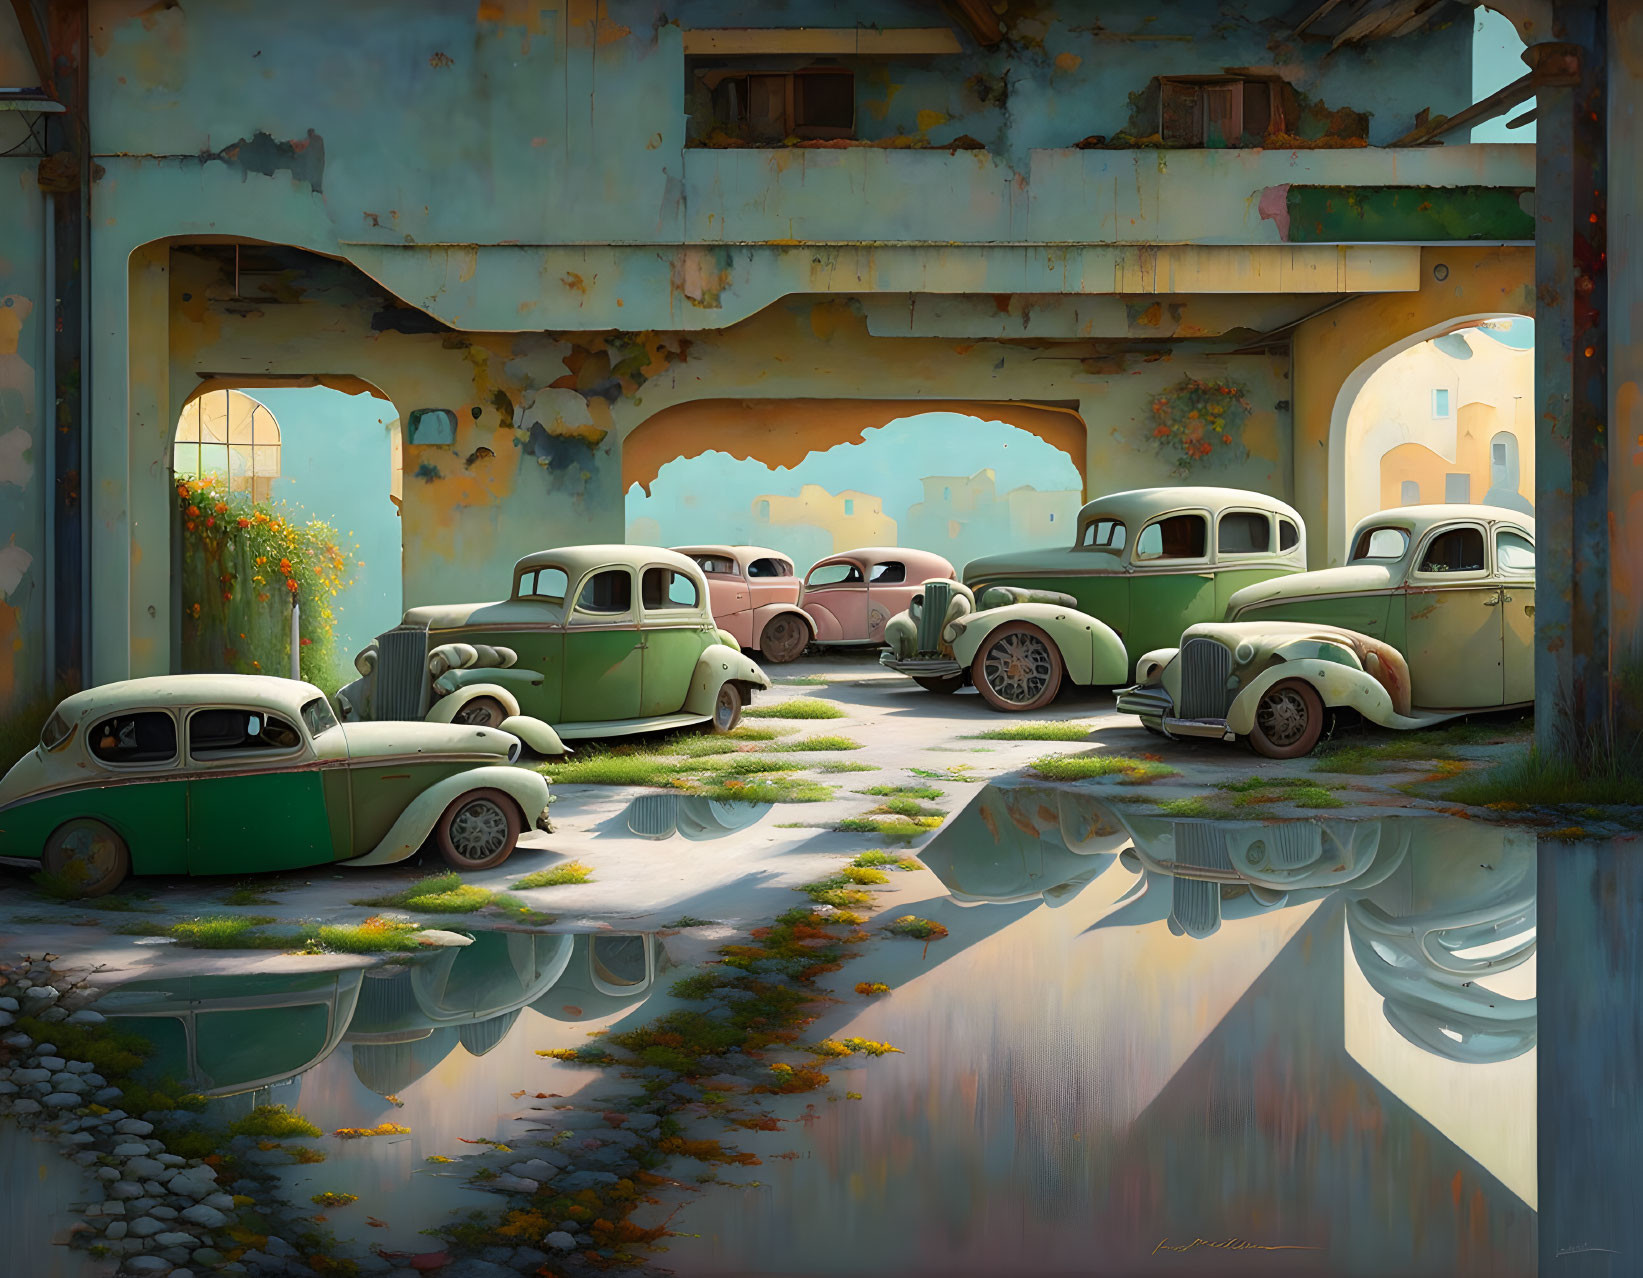 Abandoned building with vintage cars and greenery reflections